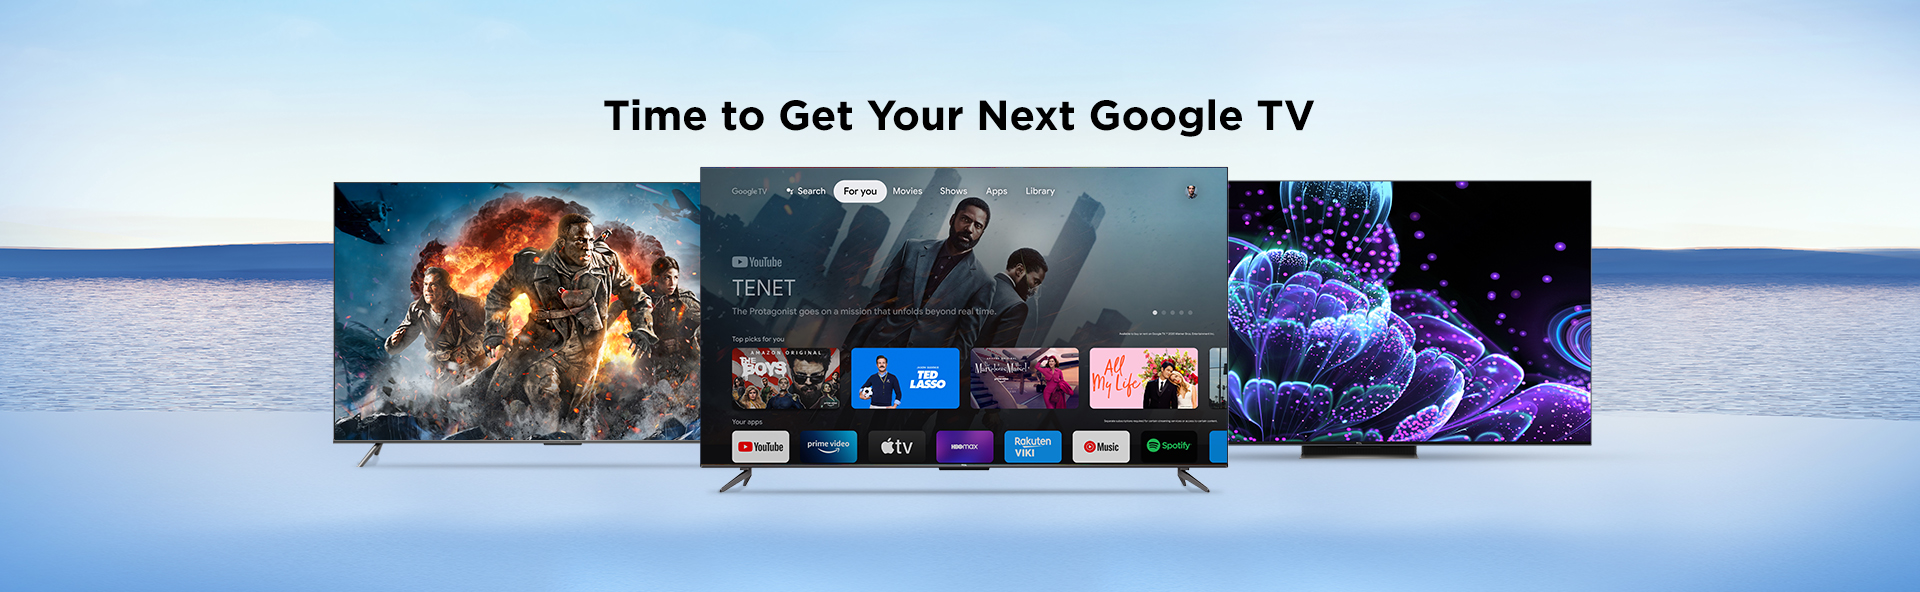 https://aws-obg-image-lb-2.tcl.com/content/dam/brandsite/region/in/blog/pc/detail/new-blogs---28th-july/2022-tv-shopping-guide-time-to-get-your-next-google-tv/TimetoGetWeb.jpg